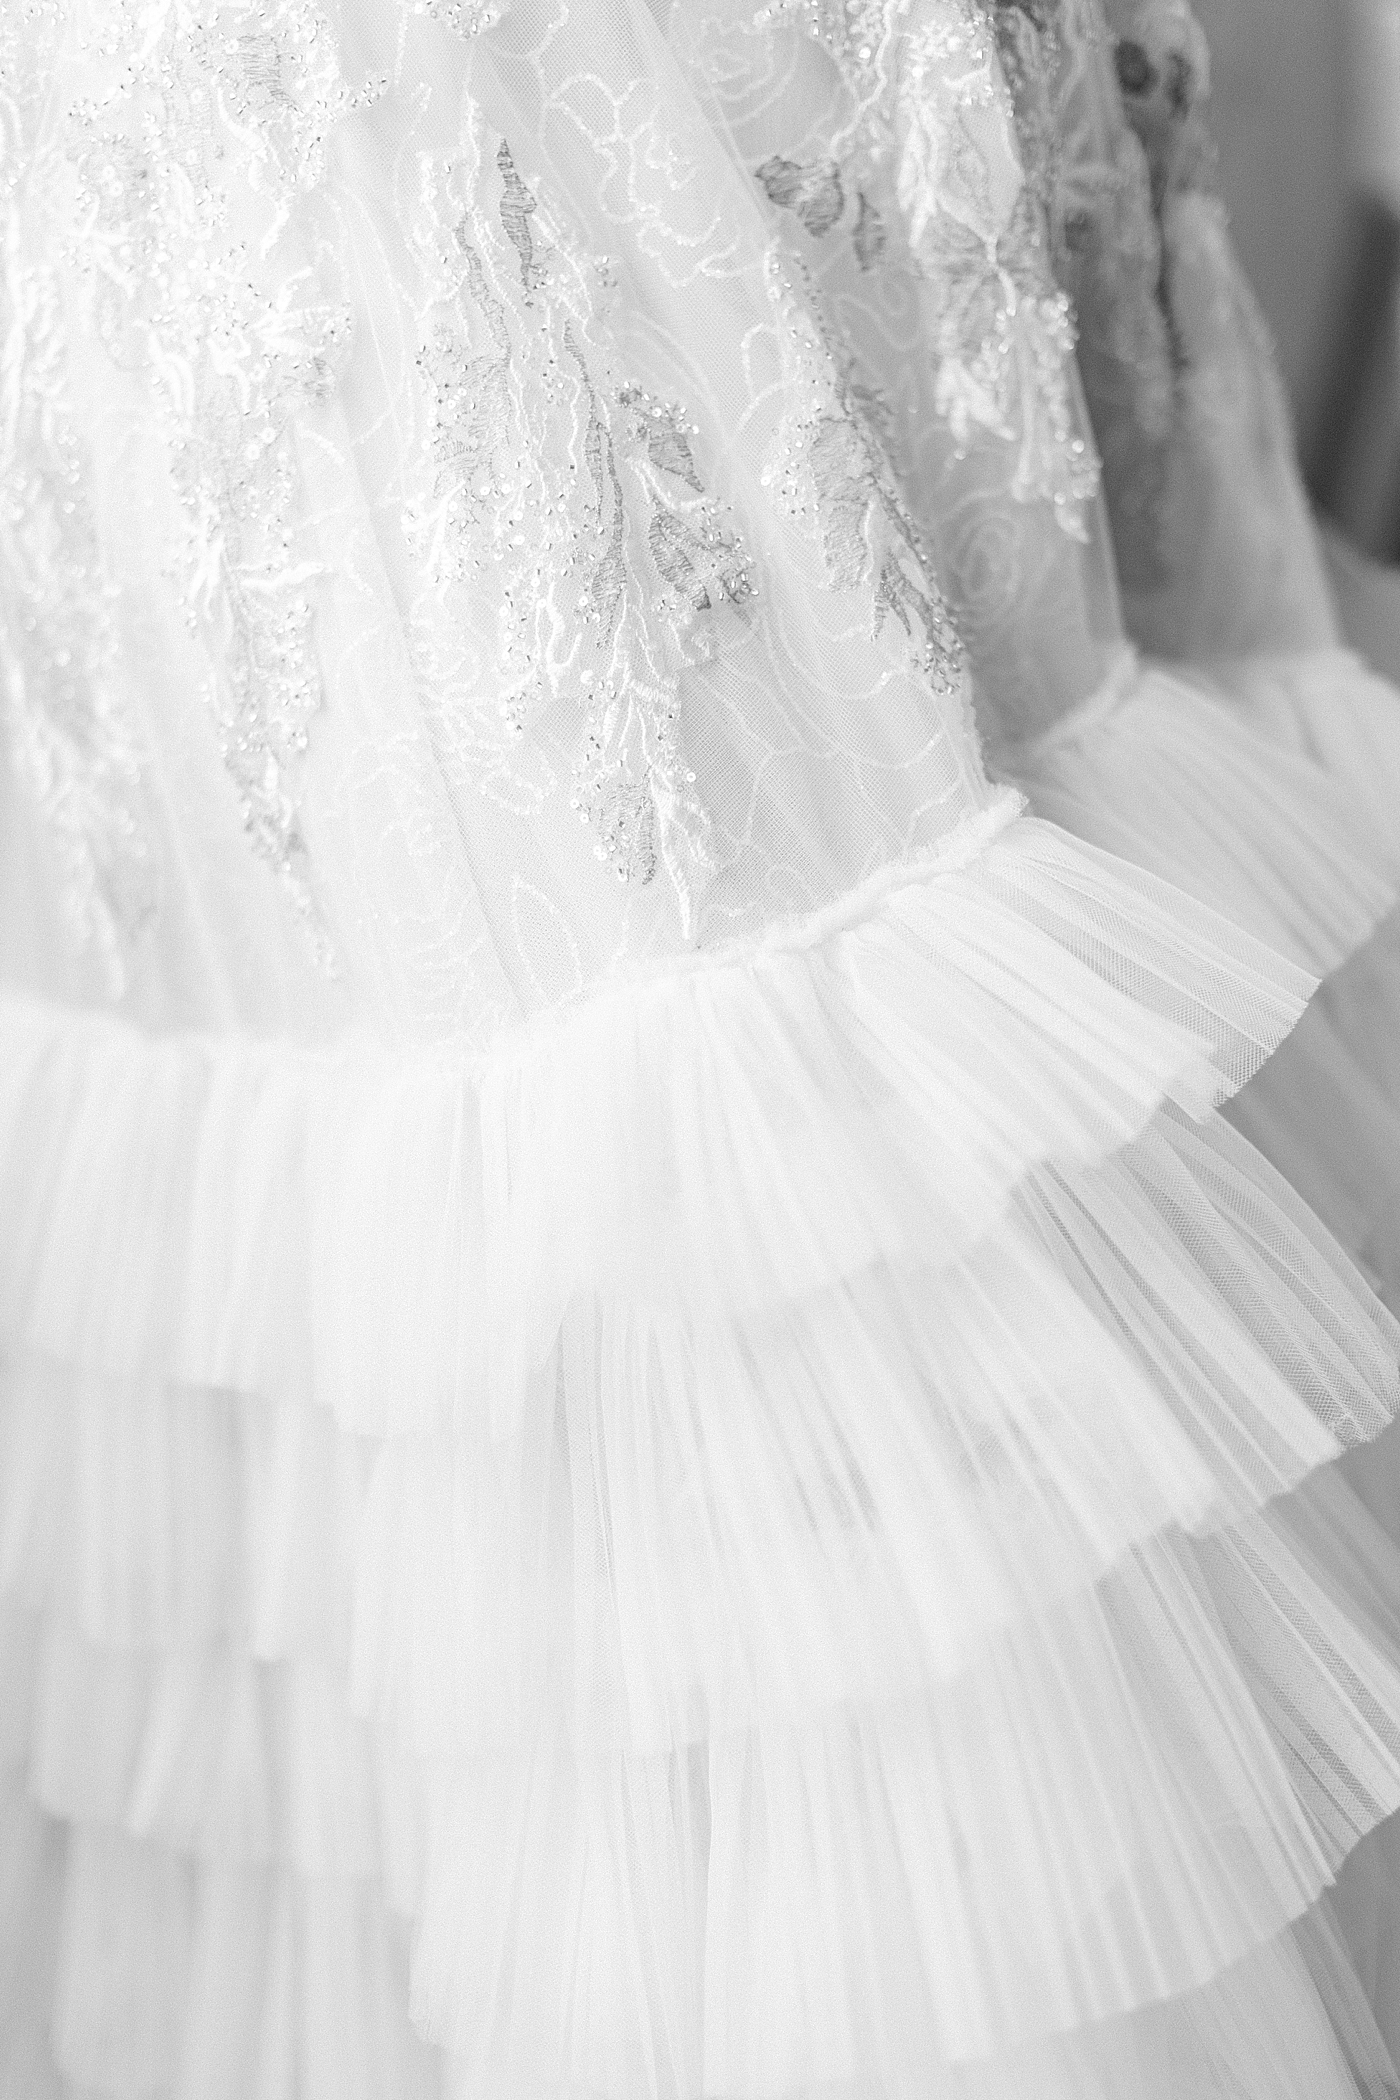 Black and white image of wedding dress details during Paris Elopement | Image by Hope Helmuth Photography